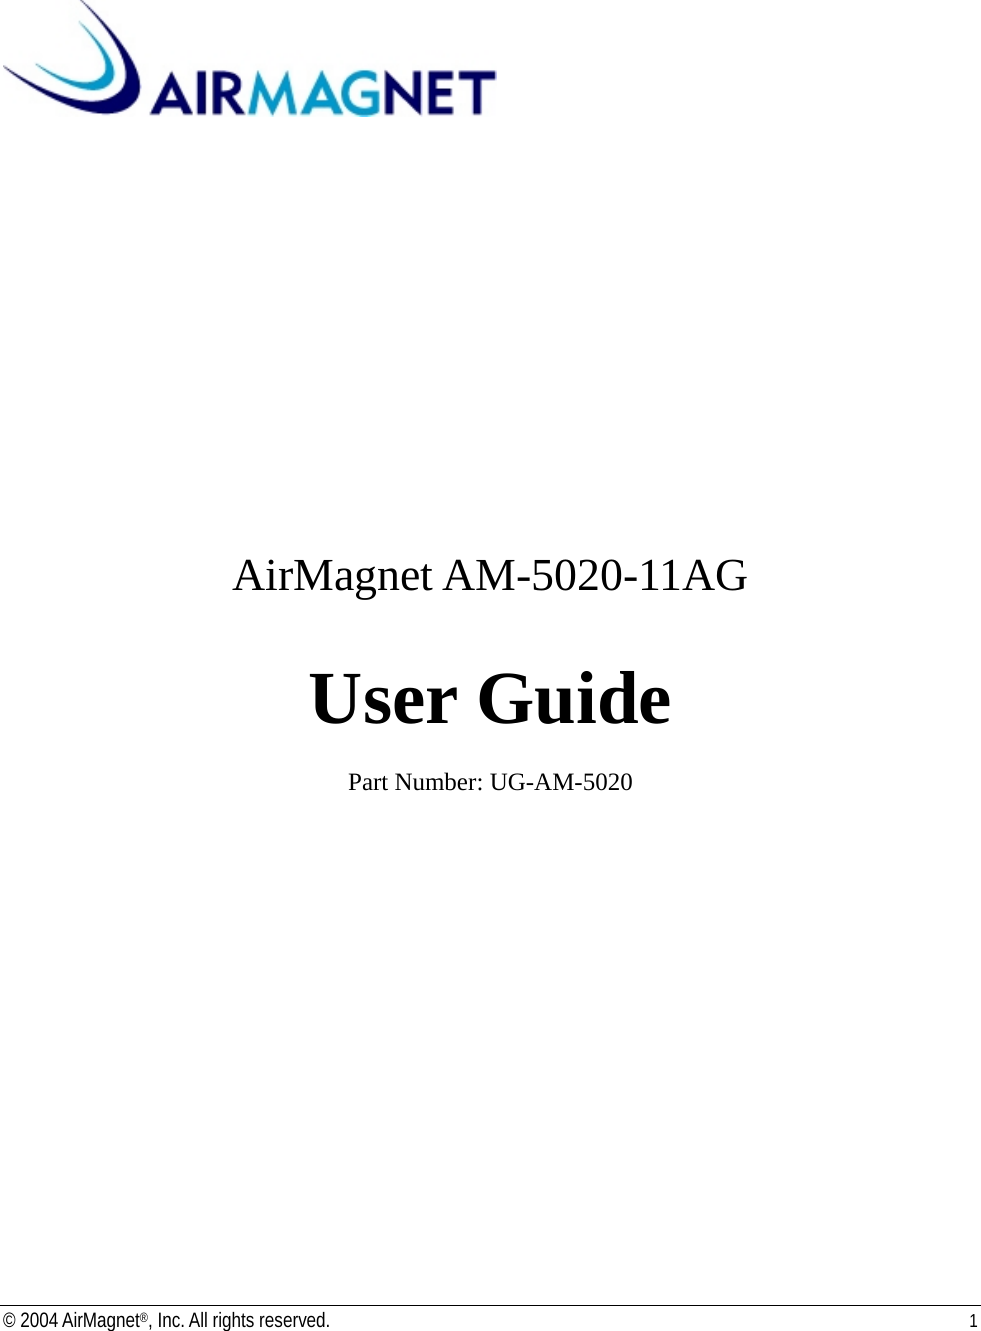                     AirMagnet AM-5020-11AG  User Guide  Part Number: UG-AM-5020 © 2004 AirMagnet®, Inc. All rights reserved.  1  